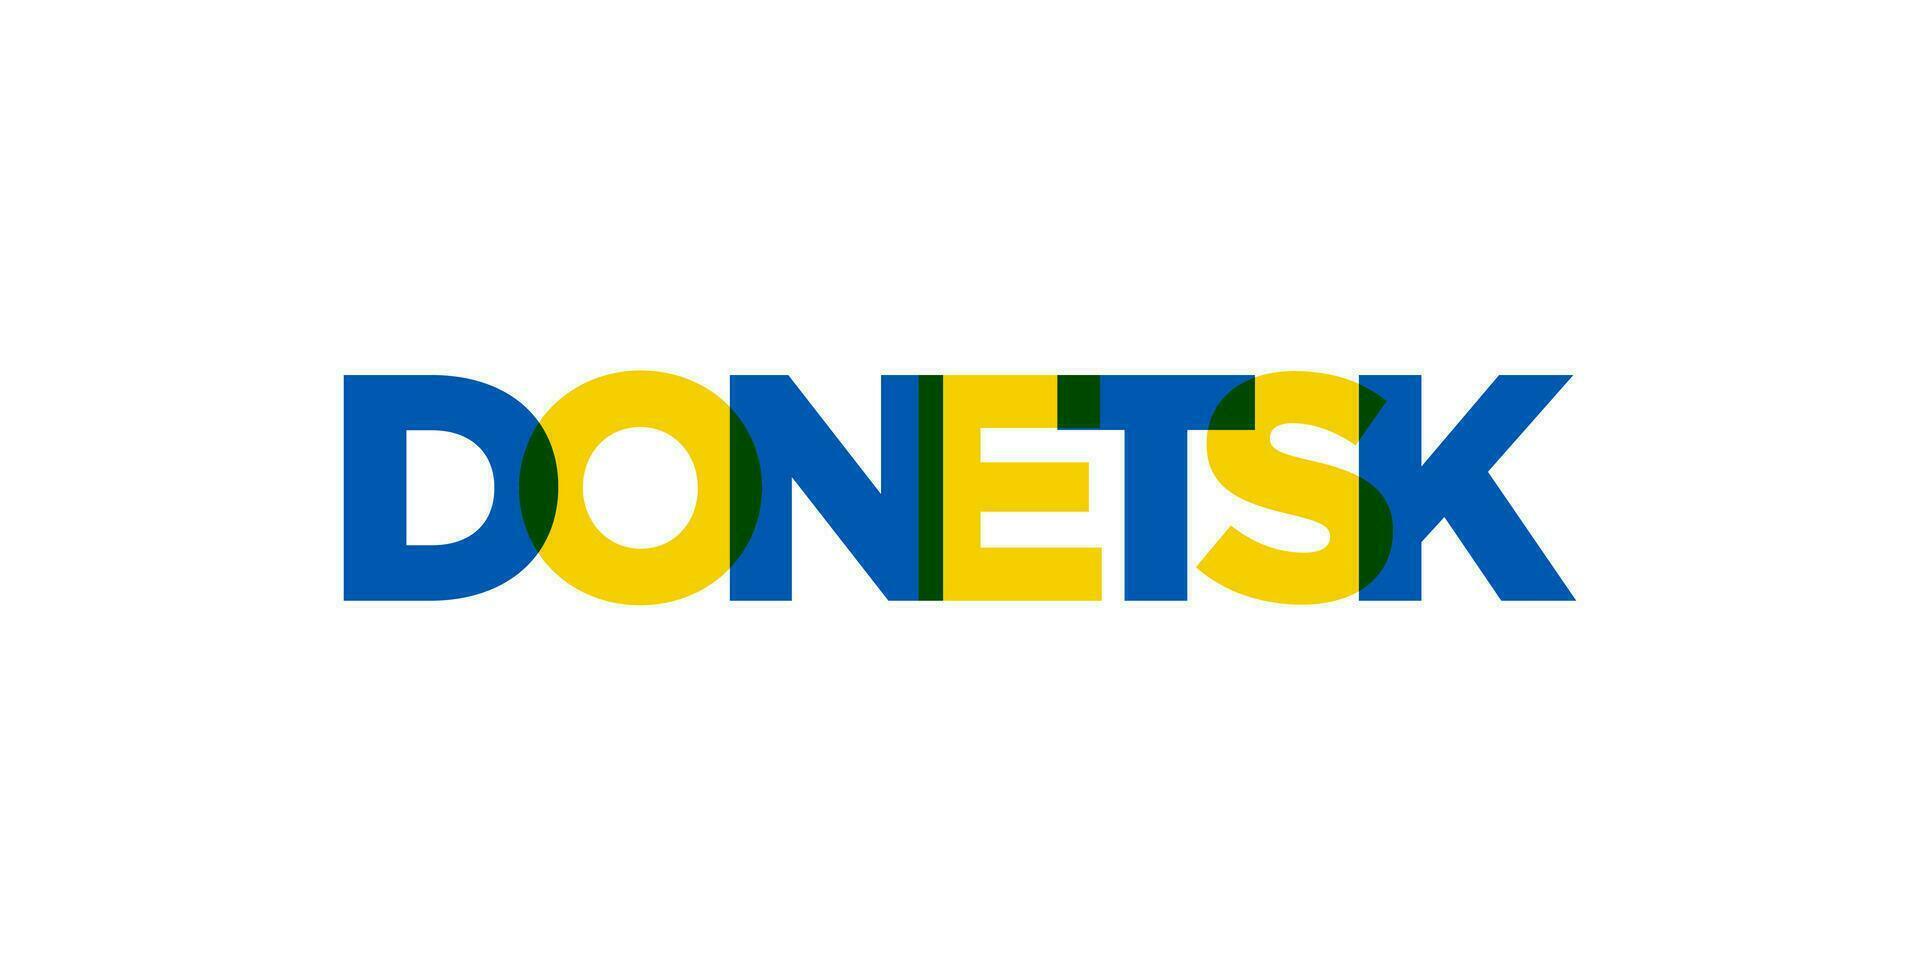 Donetsk in the Ukraine emblem. The design features a geometric style, vector illustration with bold typography in a modern font. The graphic slogan lettering.